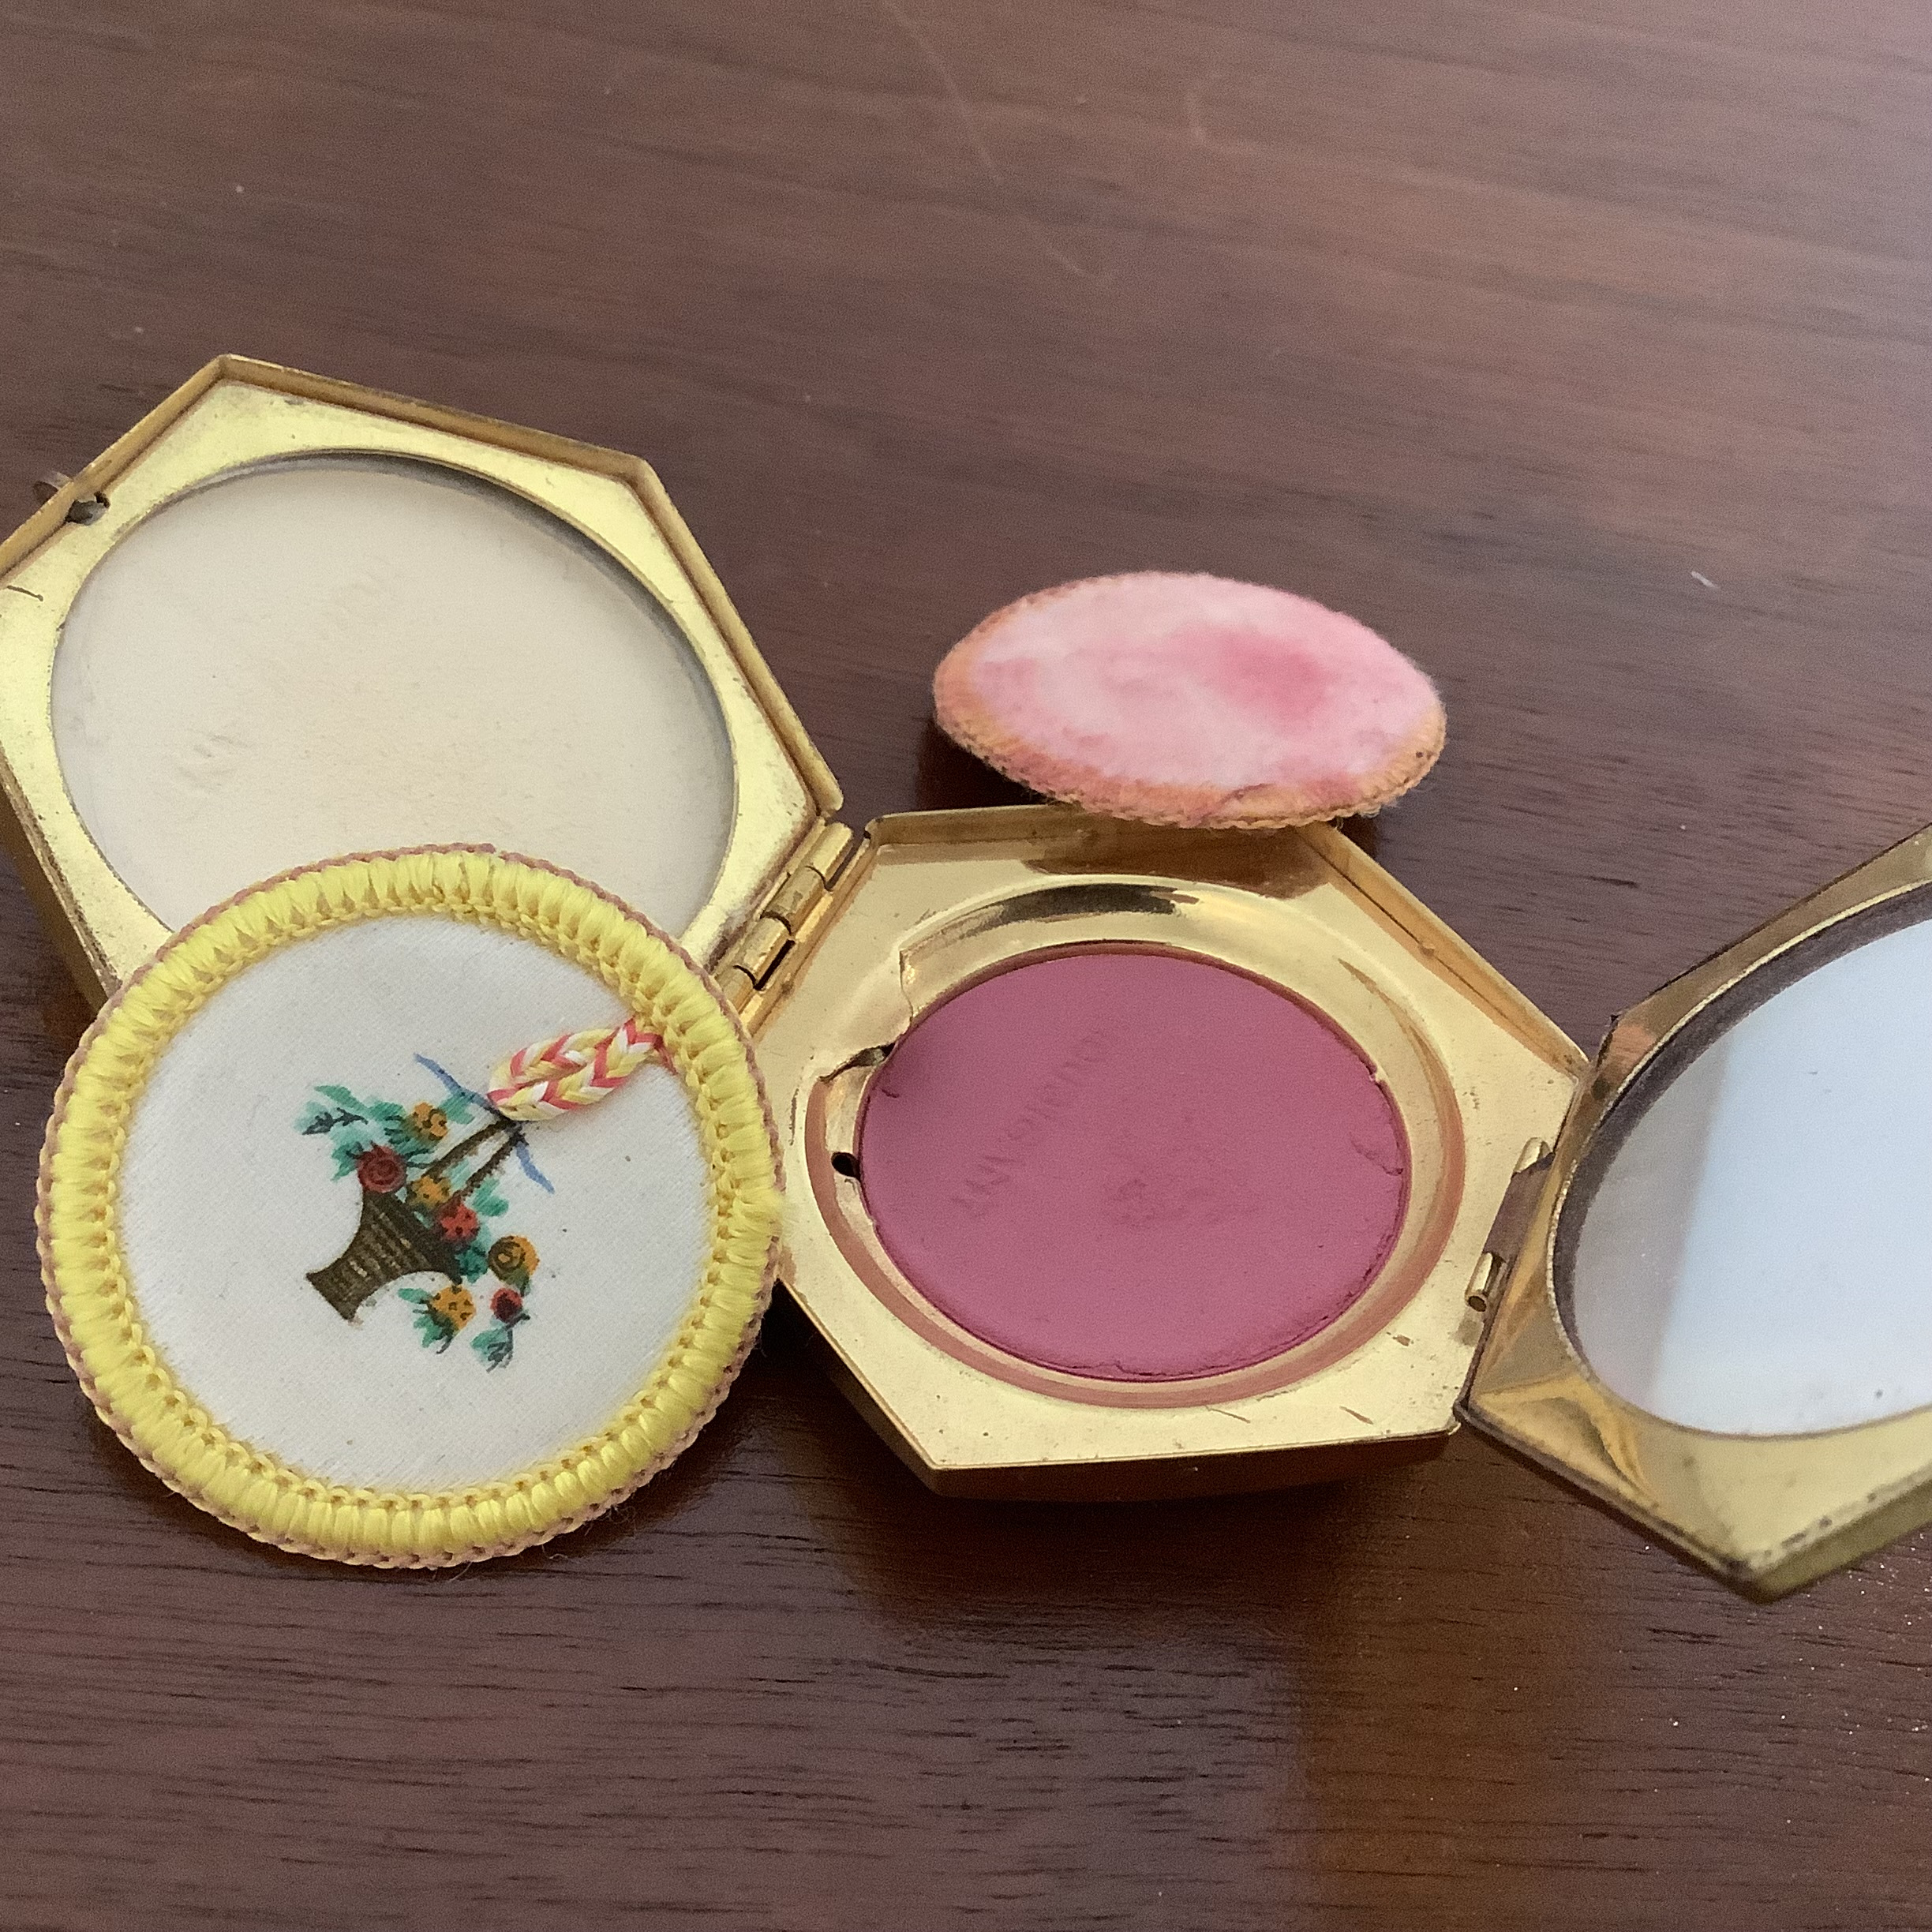 Open compact with powder puffs removed, revealing beige powder, pink blush and a mirror